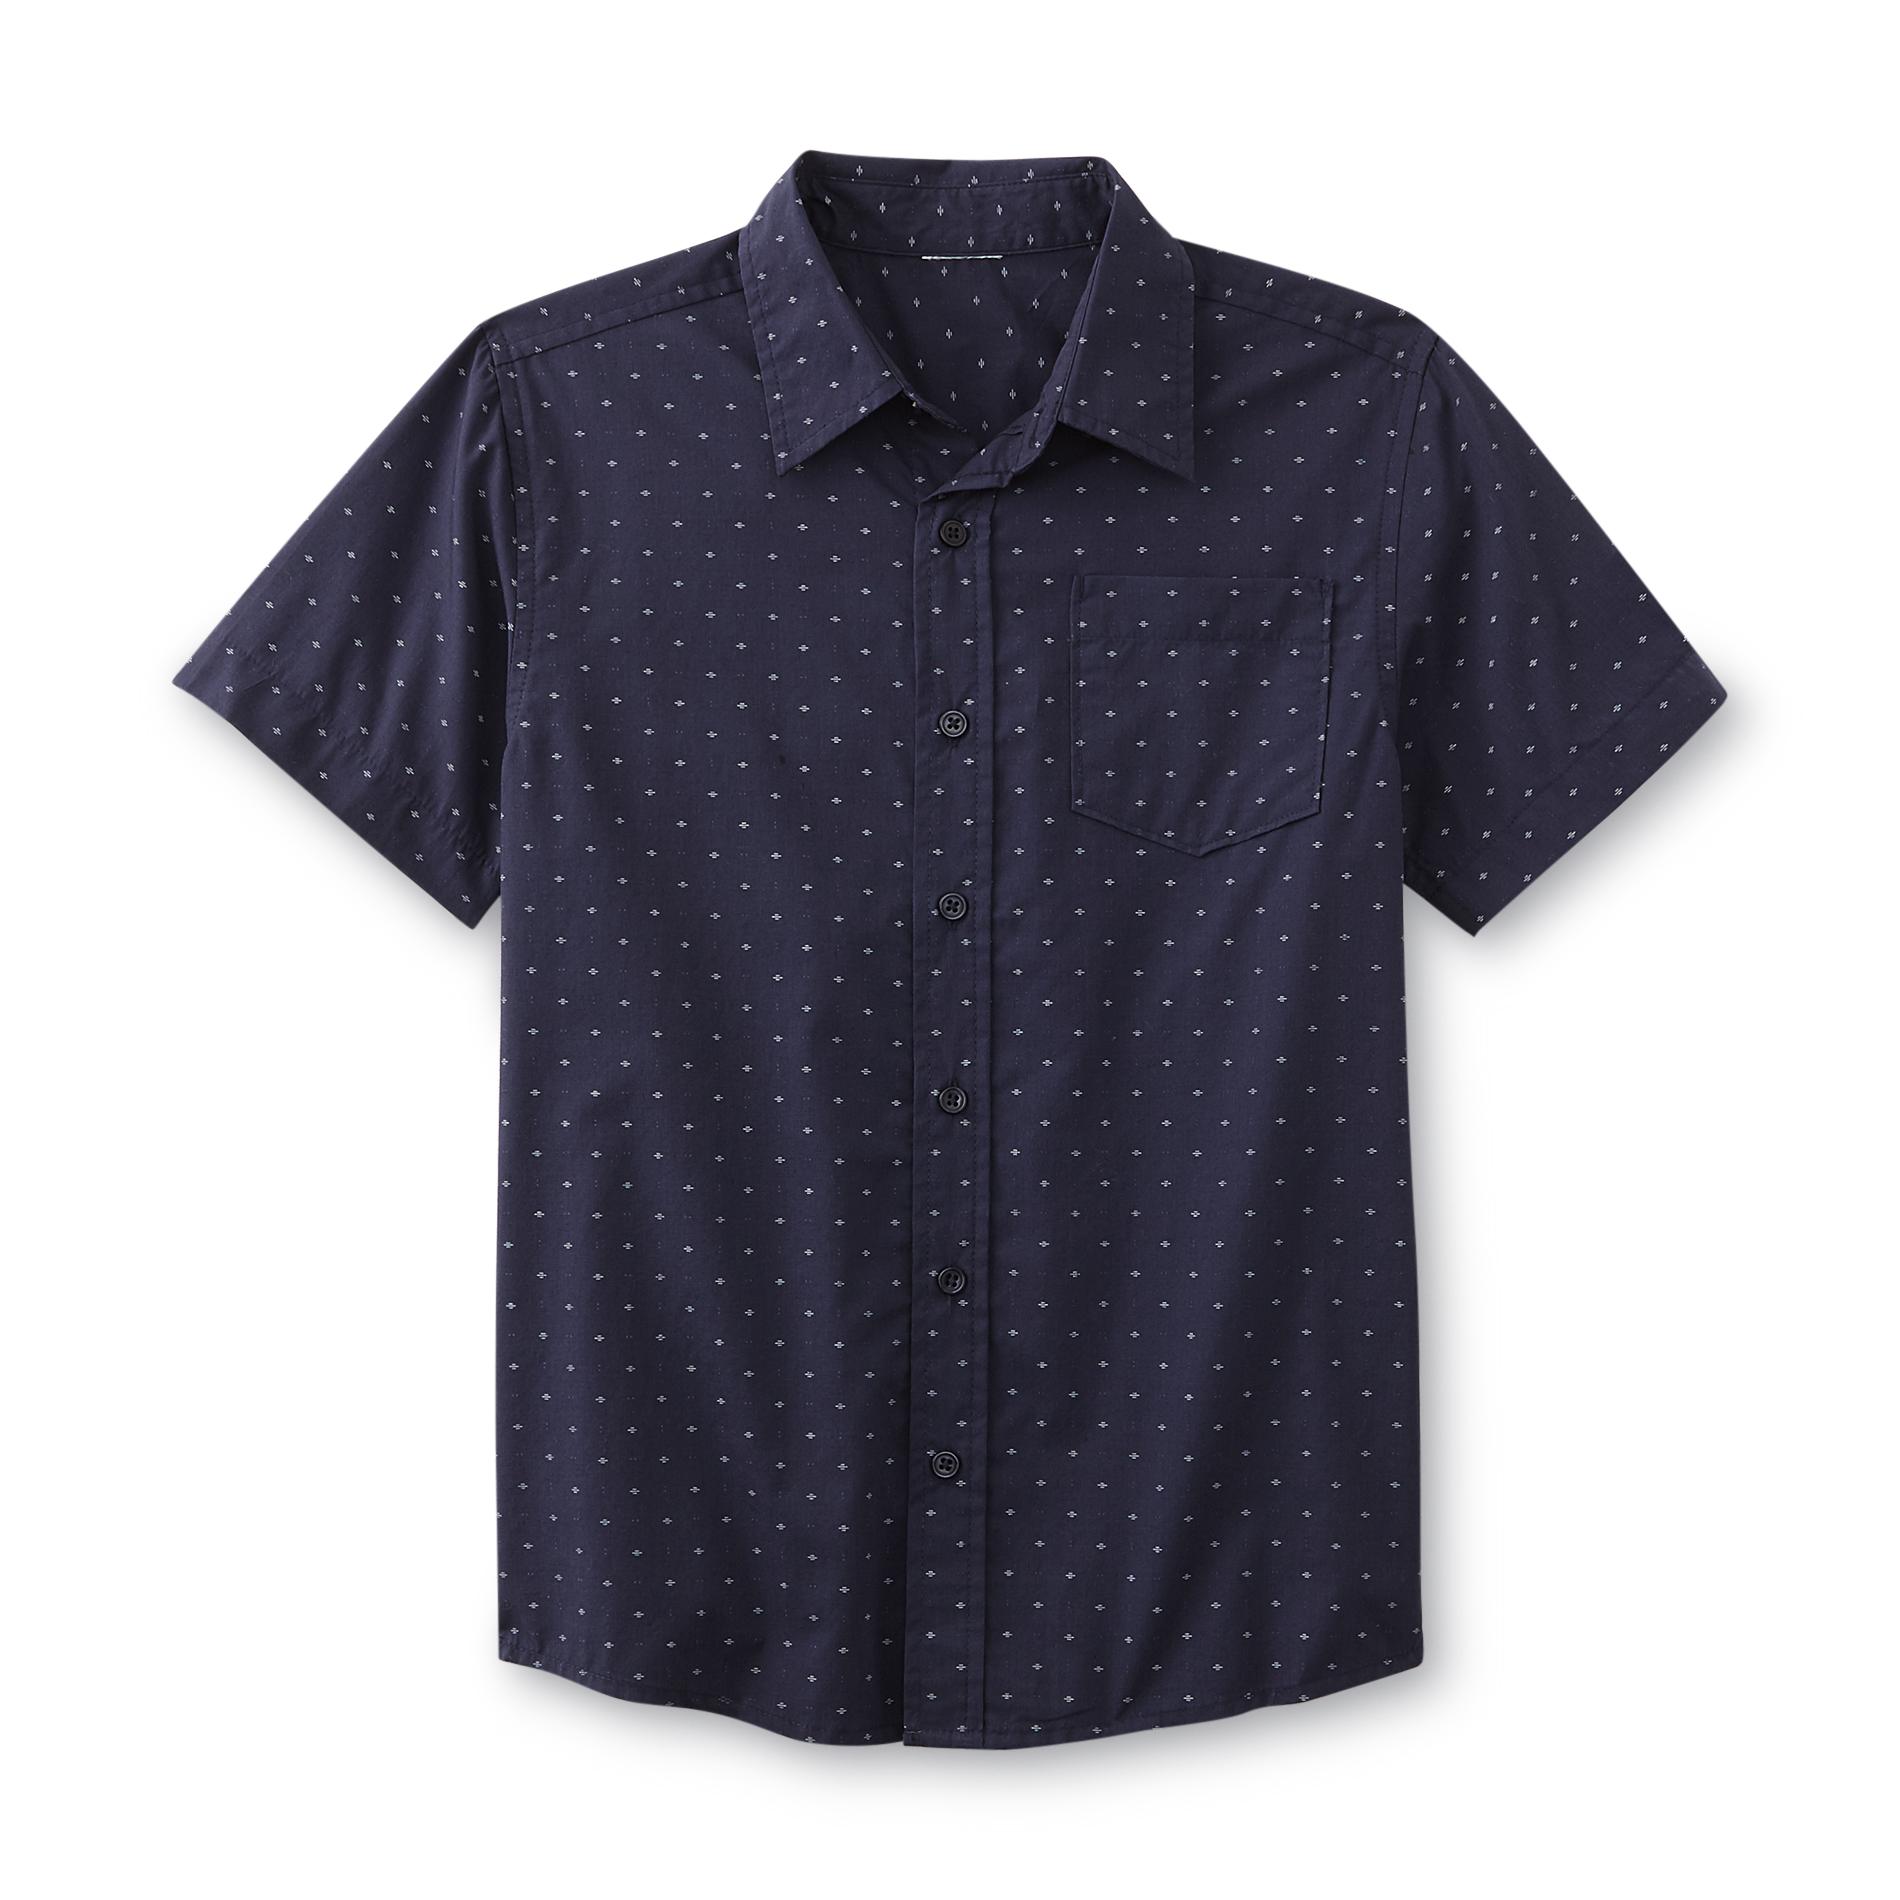 Simply Styled Boy's Button-Front Shirt - Dot